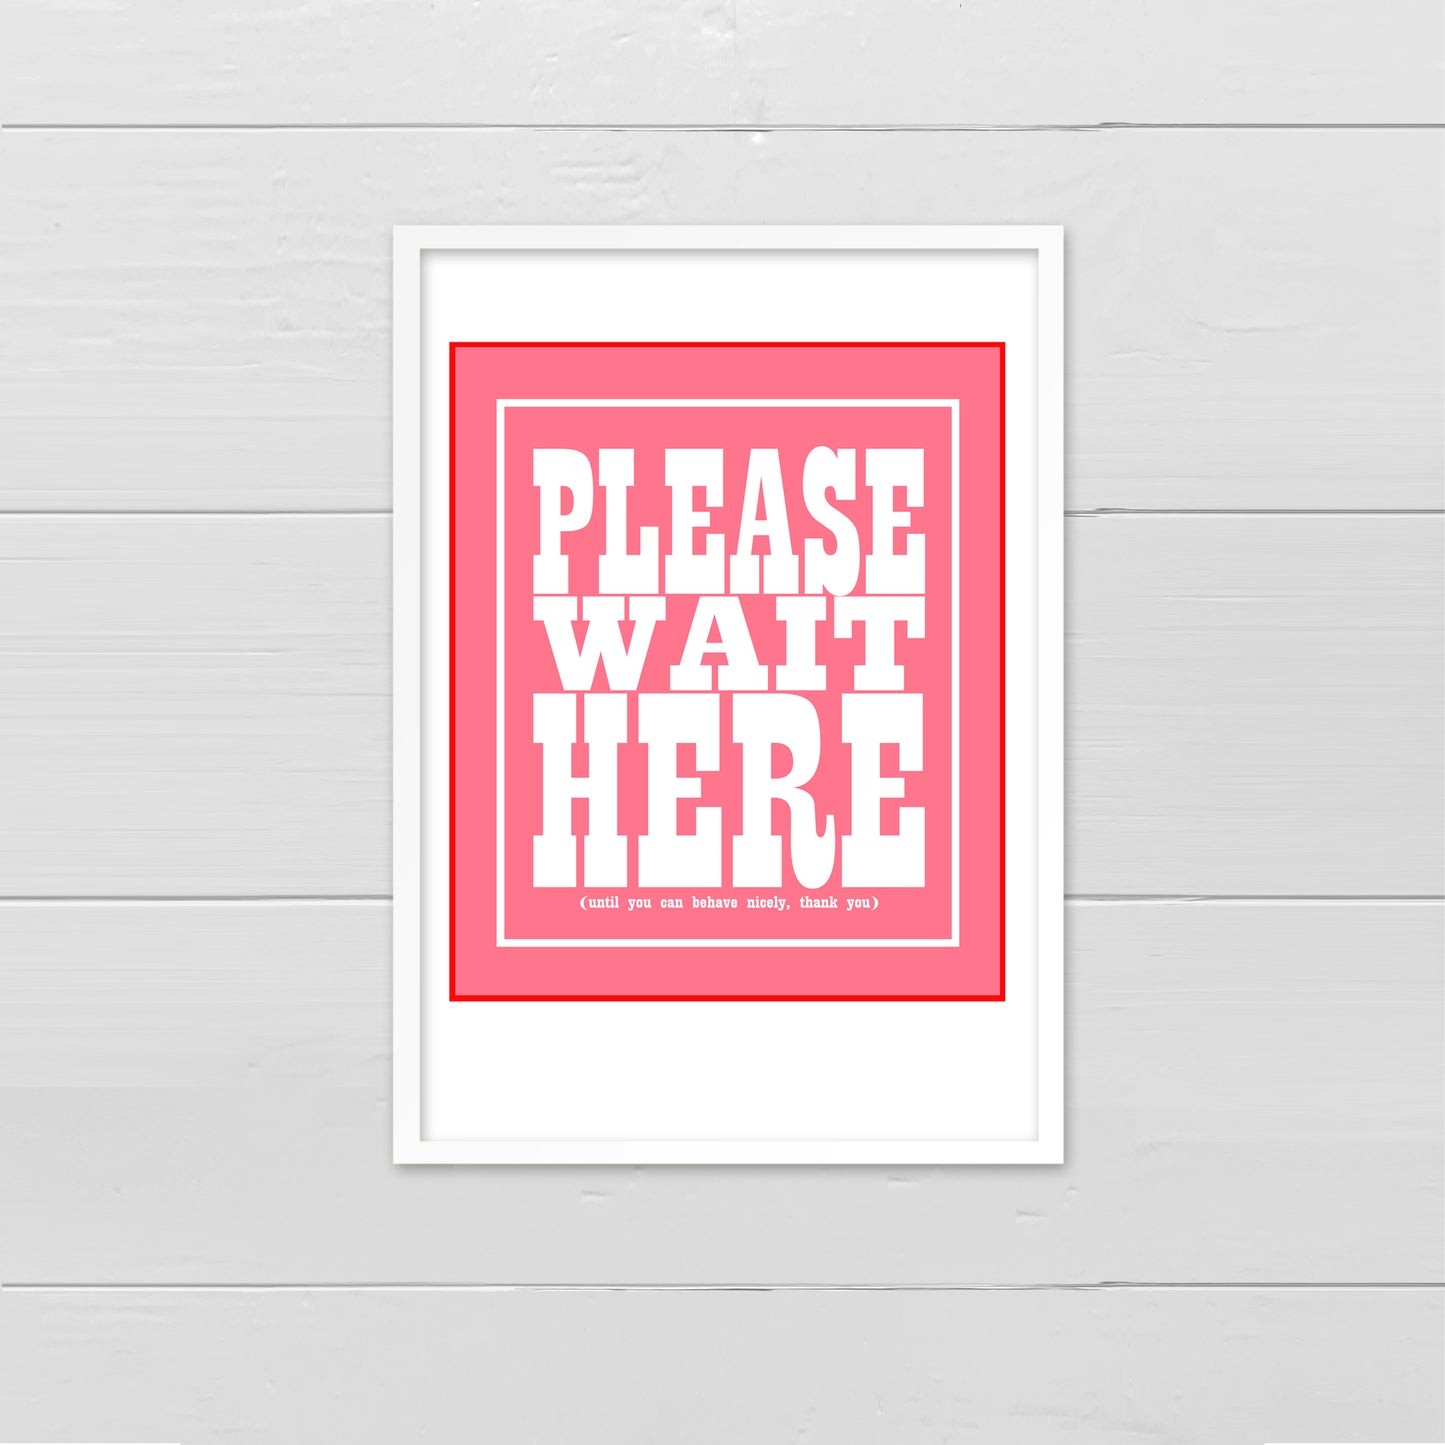 Please Wait Here.... white on pink with red flash